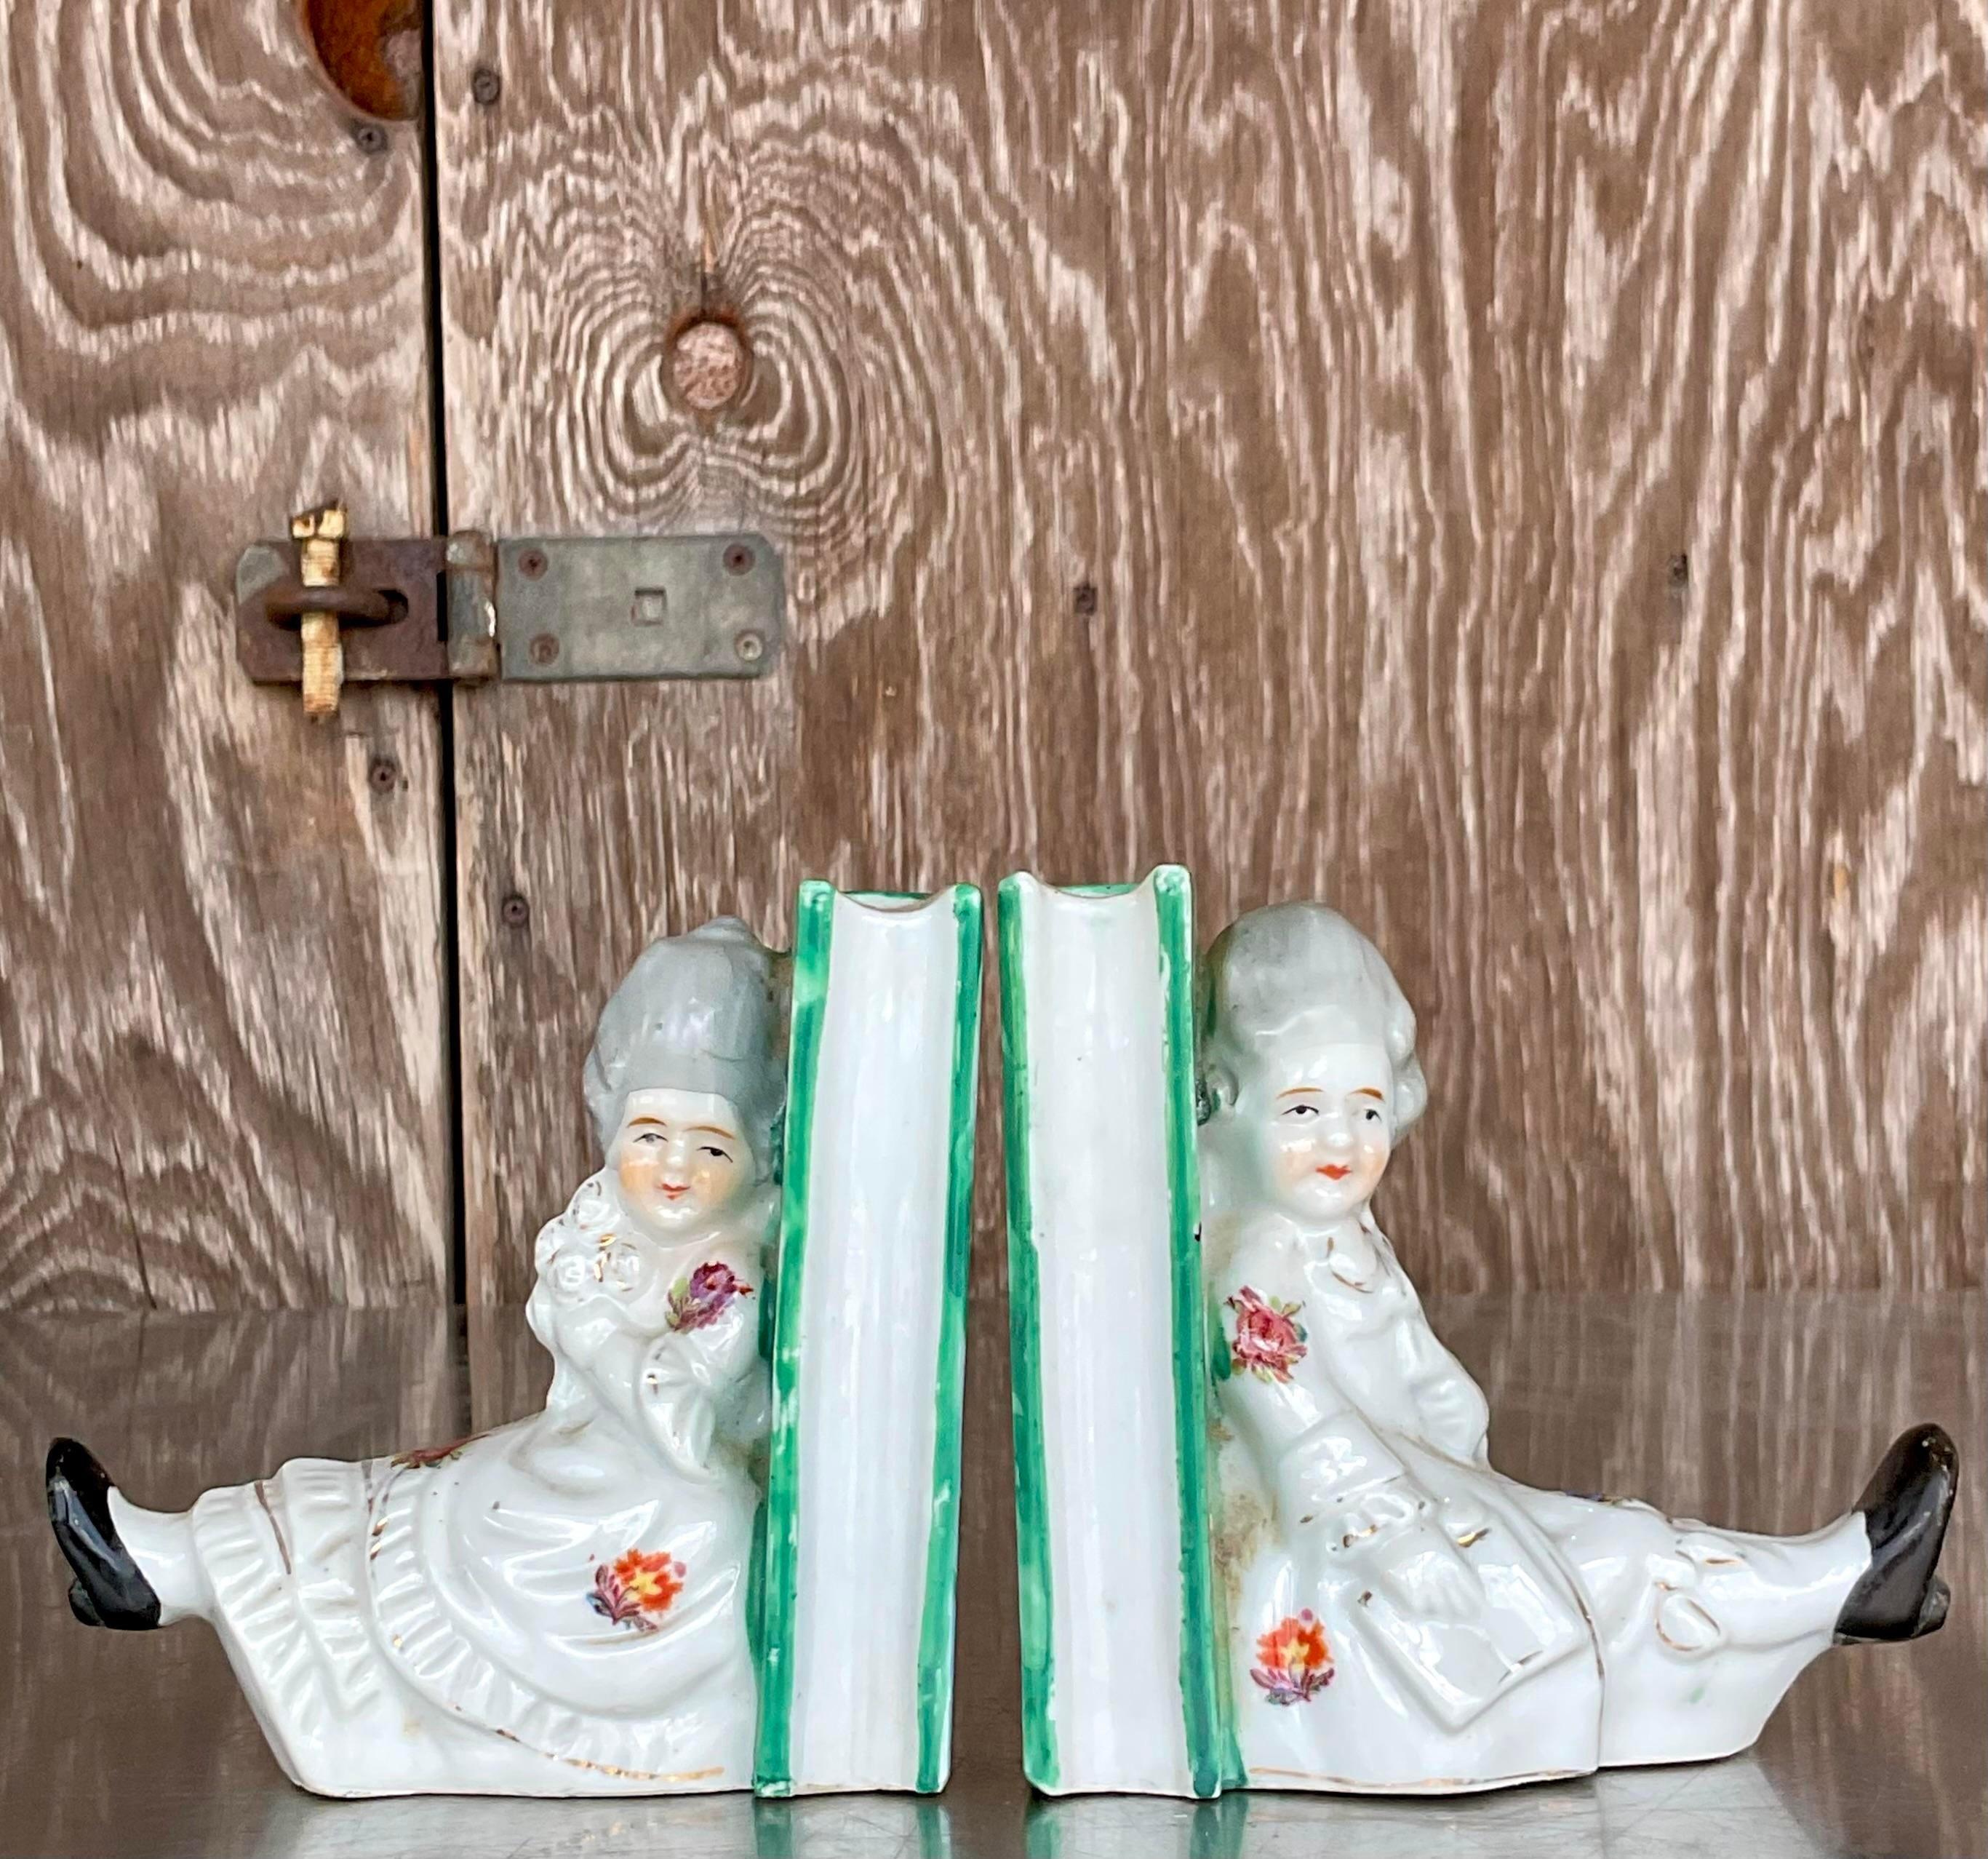 Mid-Century Modern Vintage Regency Hand-Painted Bookends - a Pair For Sale